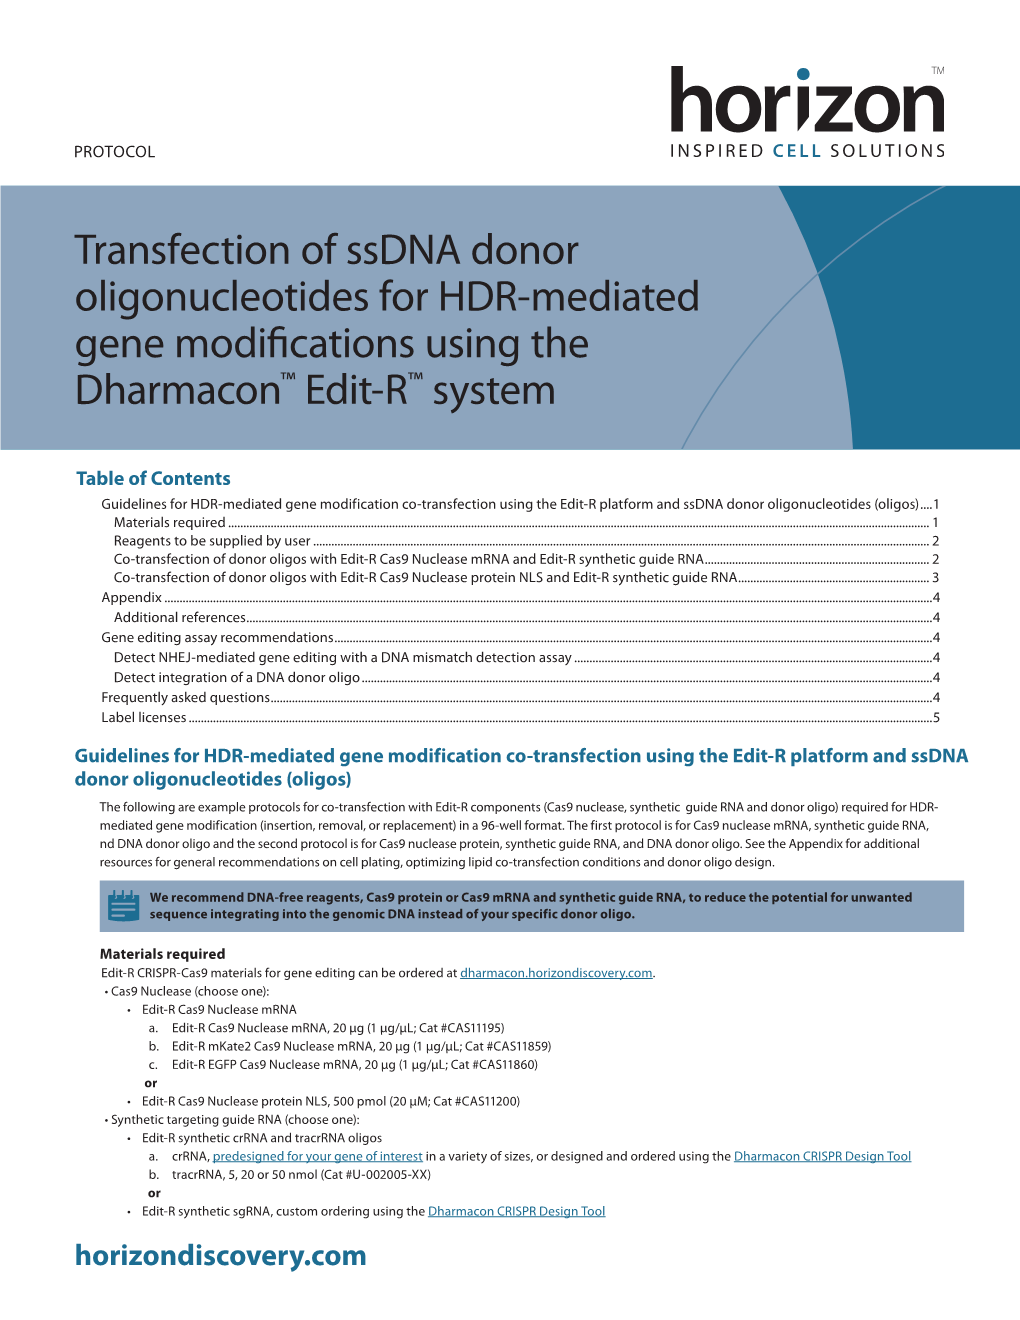 Transfection of Ssdna Donor Oligonucleotides for HDR-Mediated Gene Modifications Using the Dharmacon™ Edit-R™ System